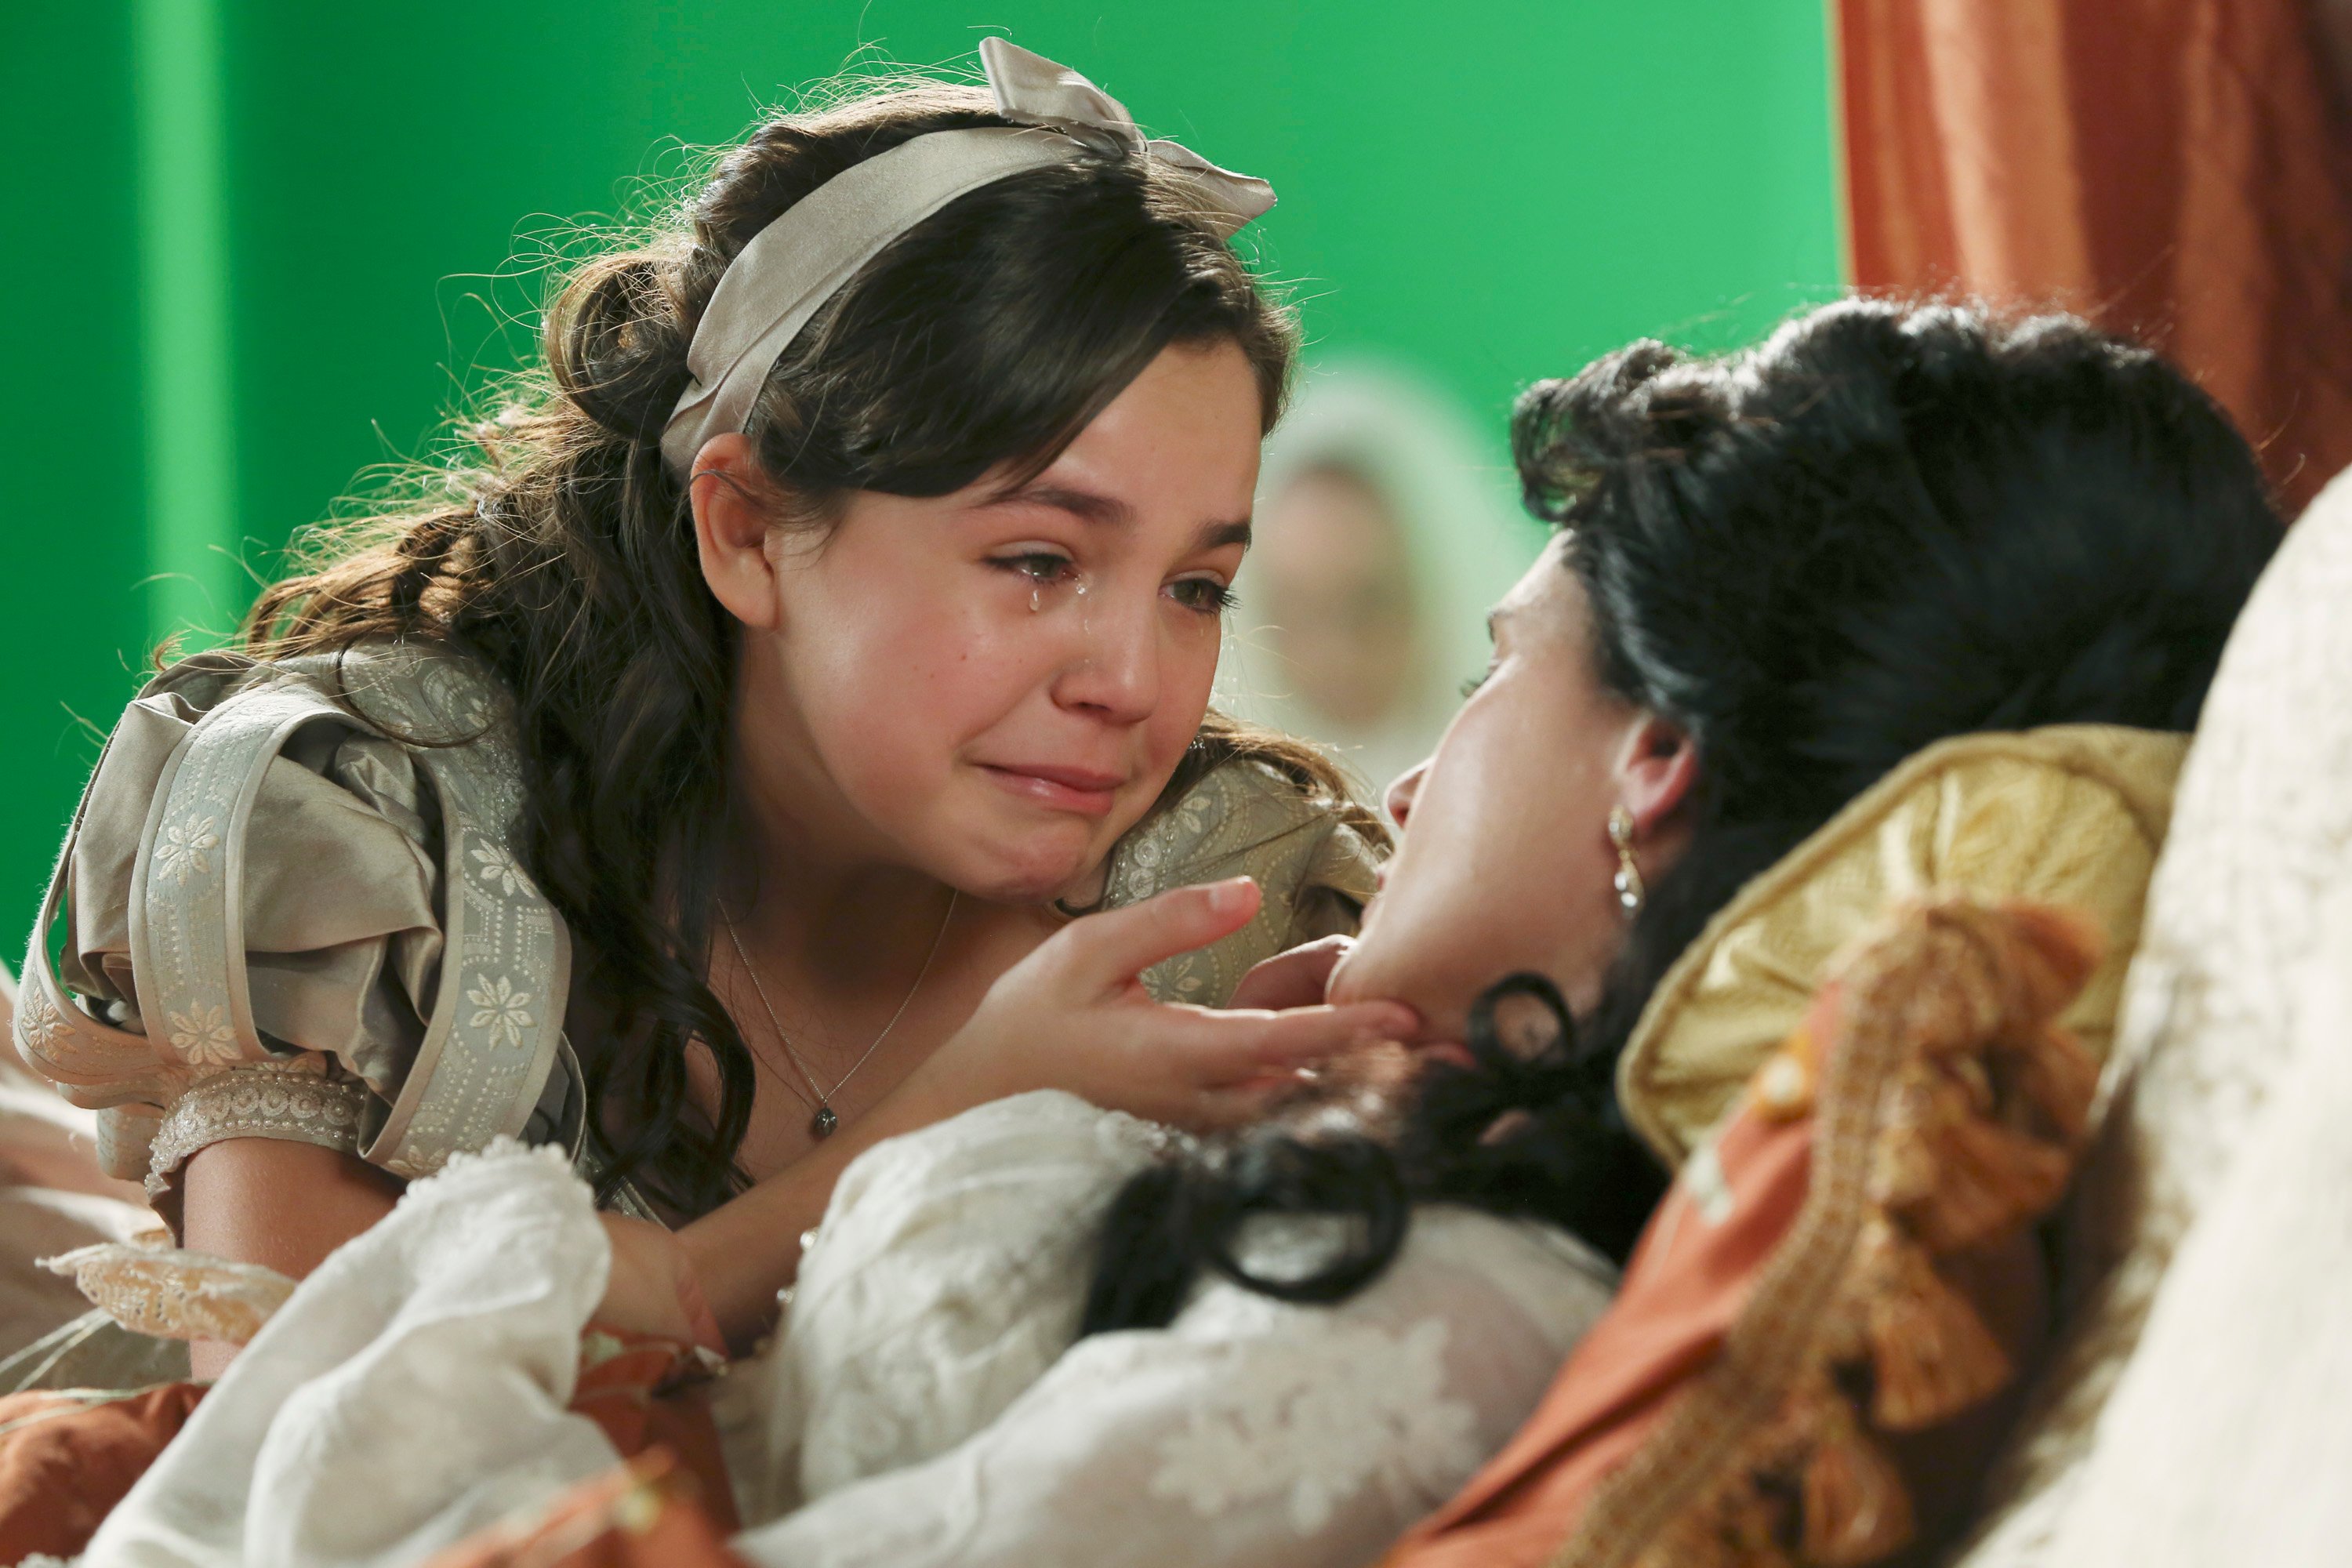 Bailee Madison crying as Young Snow White 